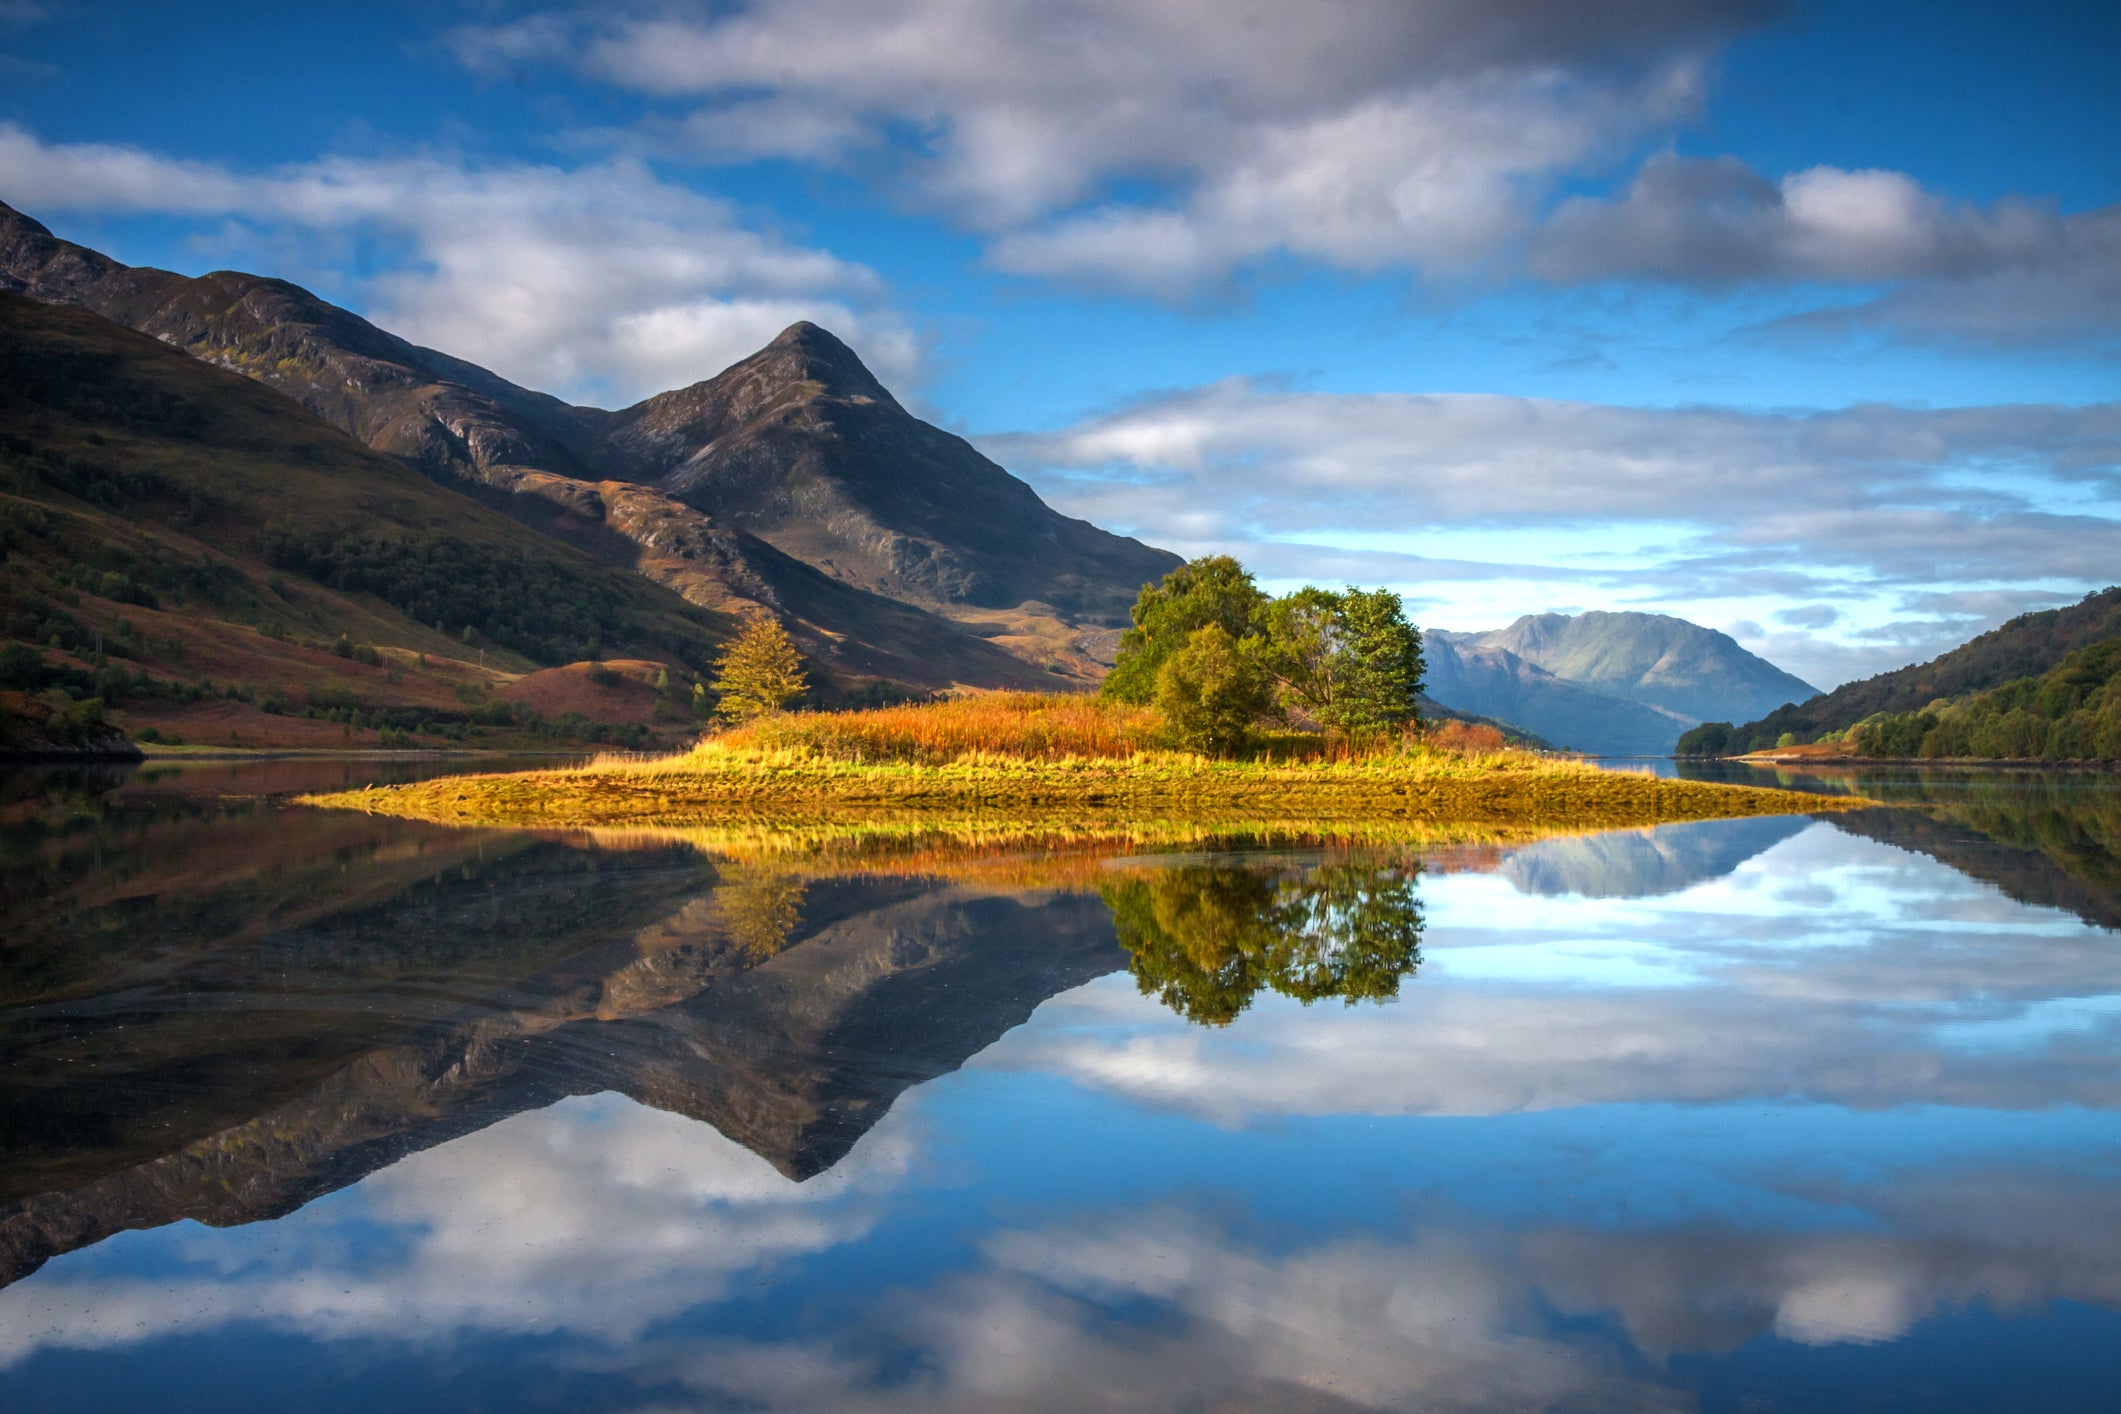 Trek Loch Leven’s shores and the historic Glencoe while discovering the Scottish Highlands